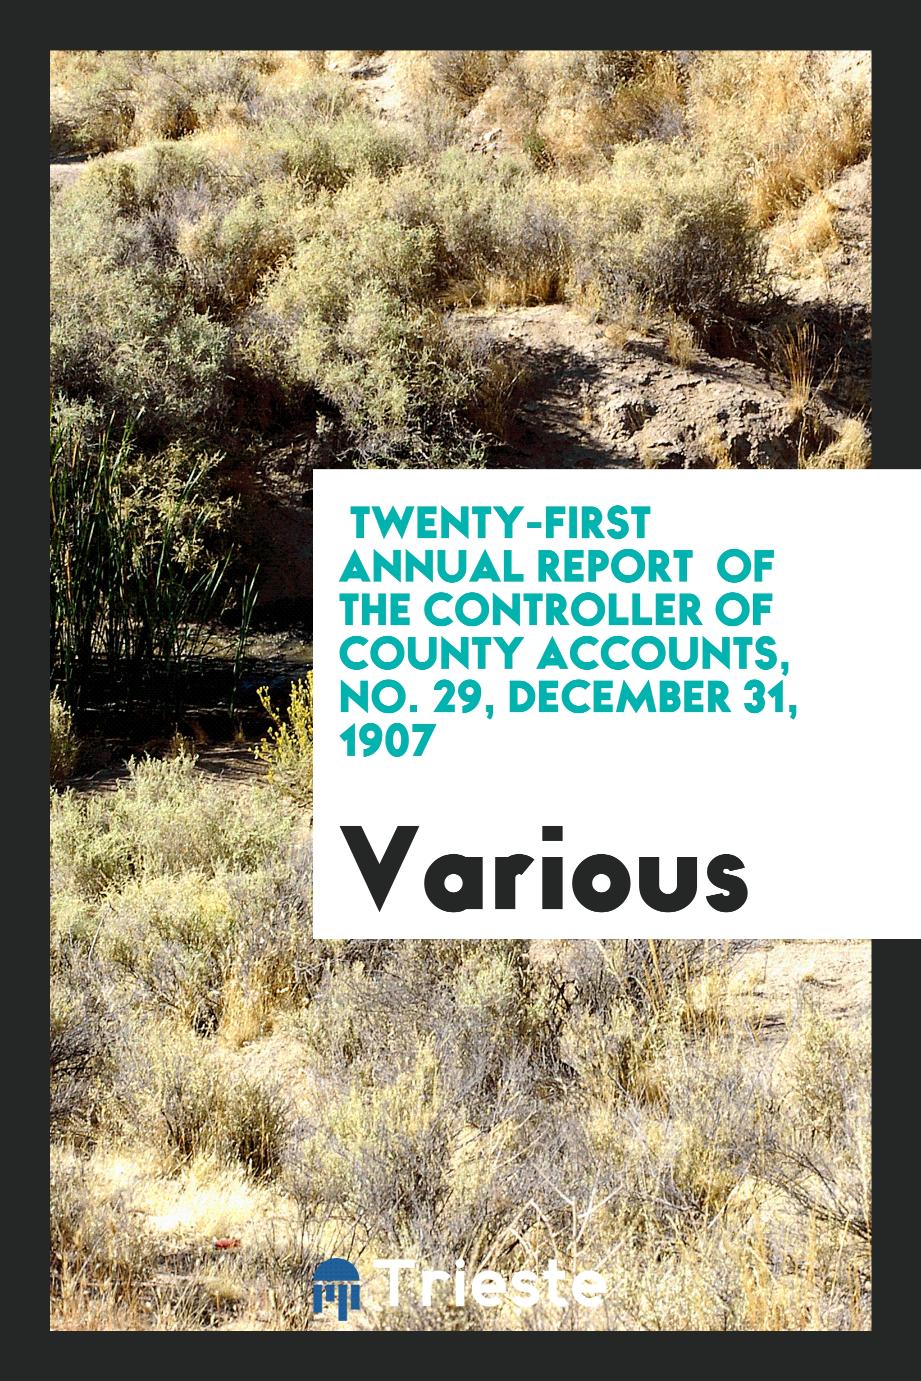 Twenty-First annual report of the Controller of county accounts, No. 29, December 31, 1907